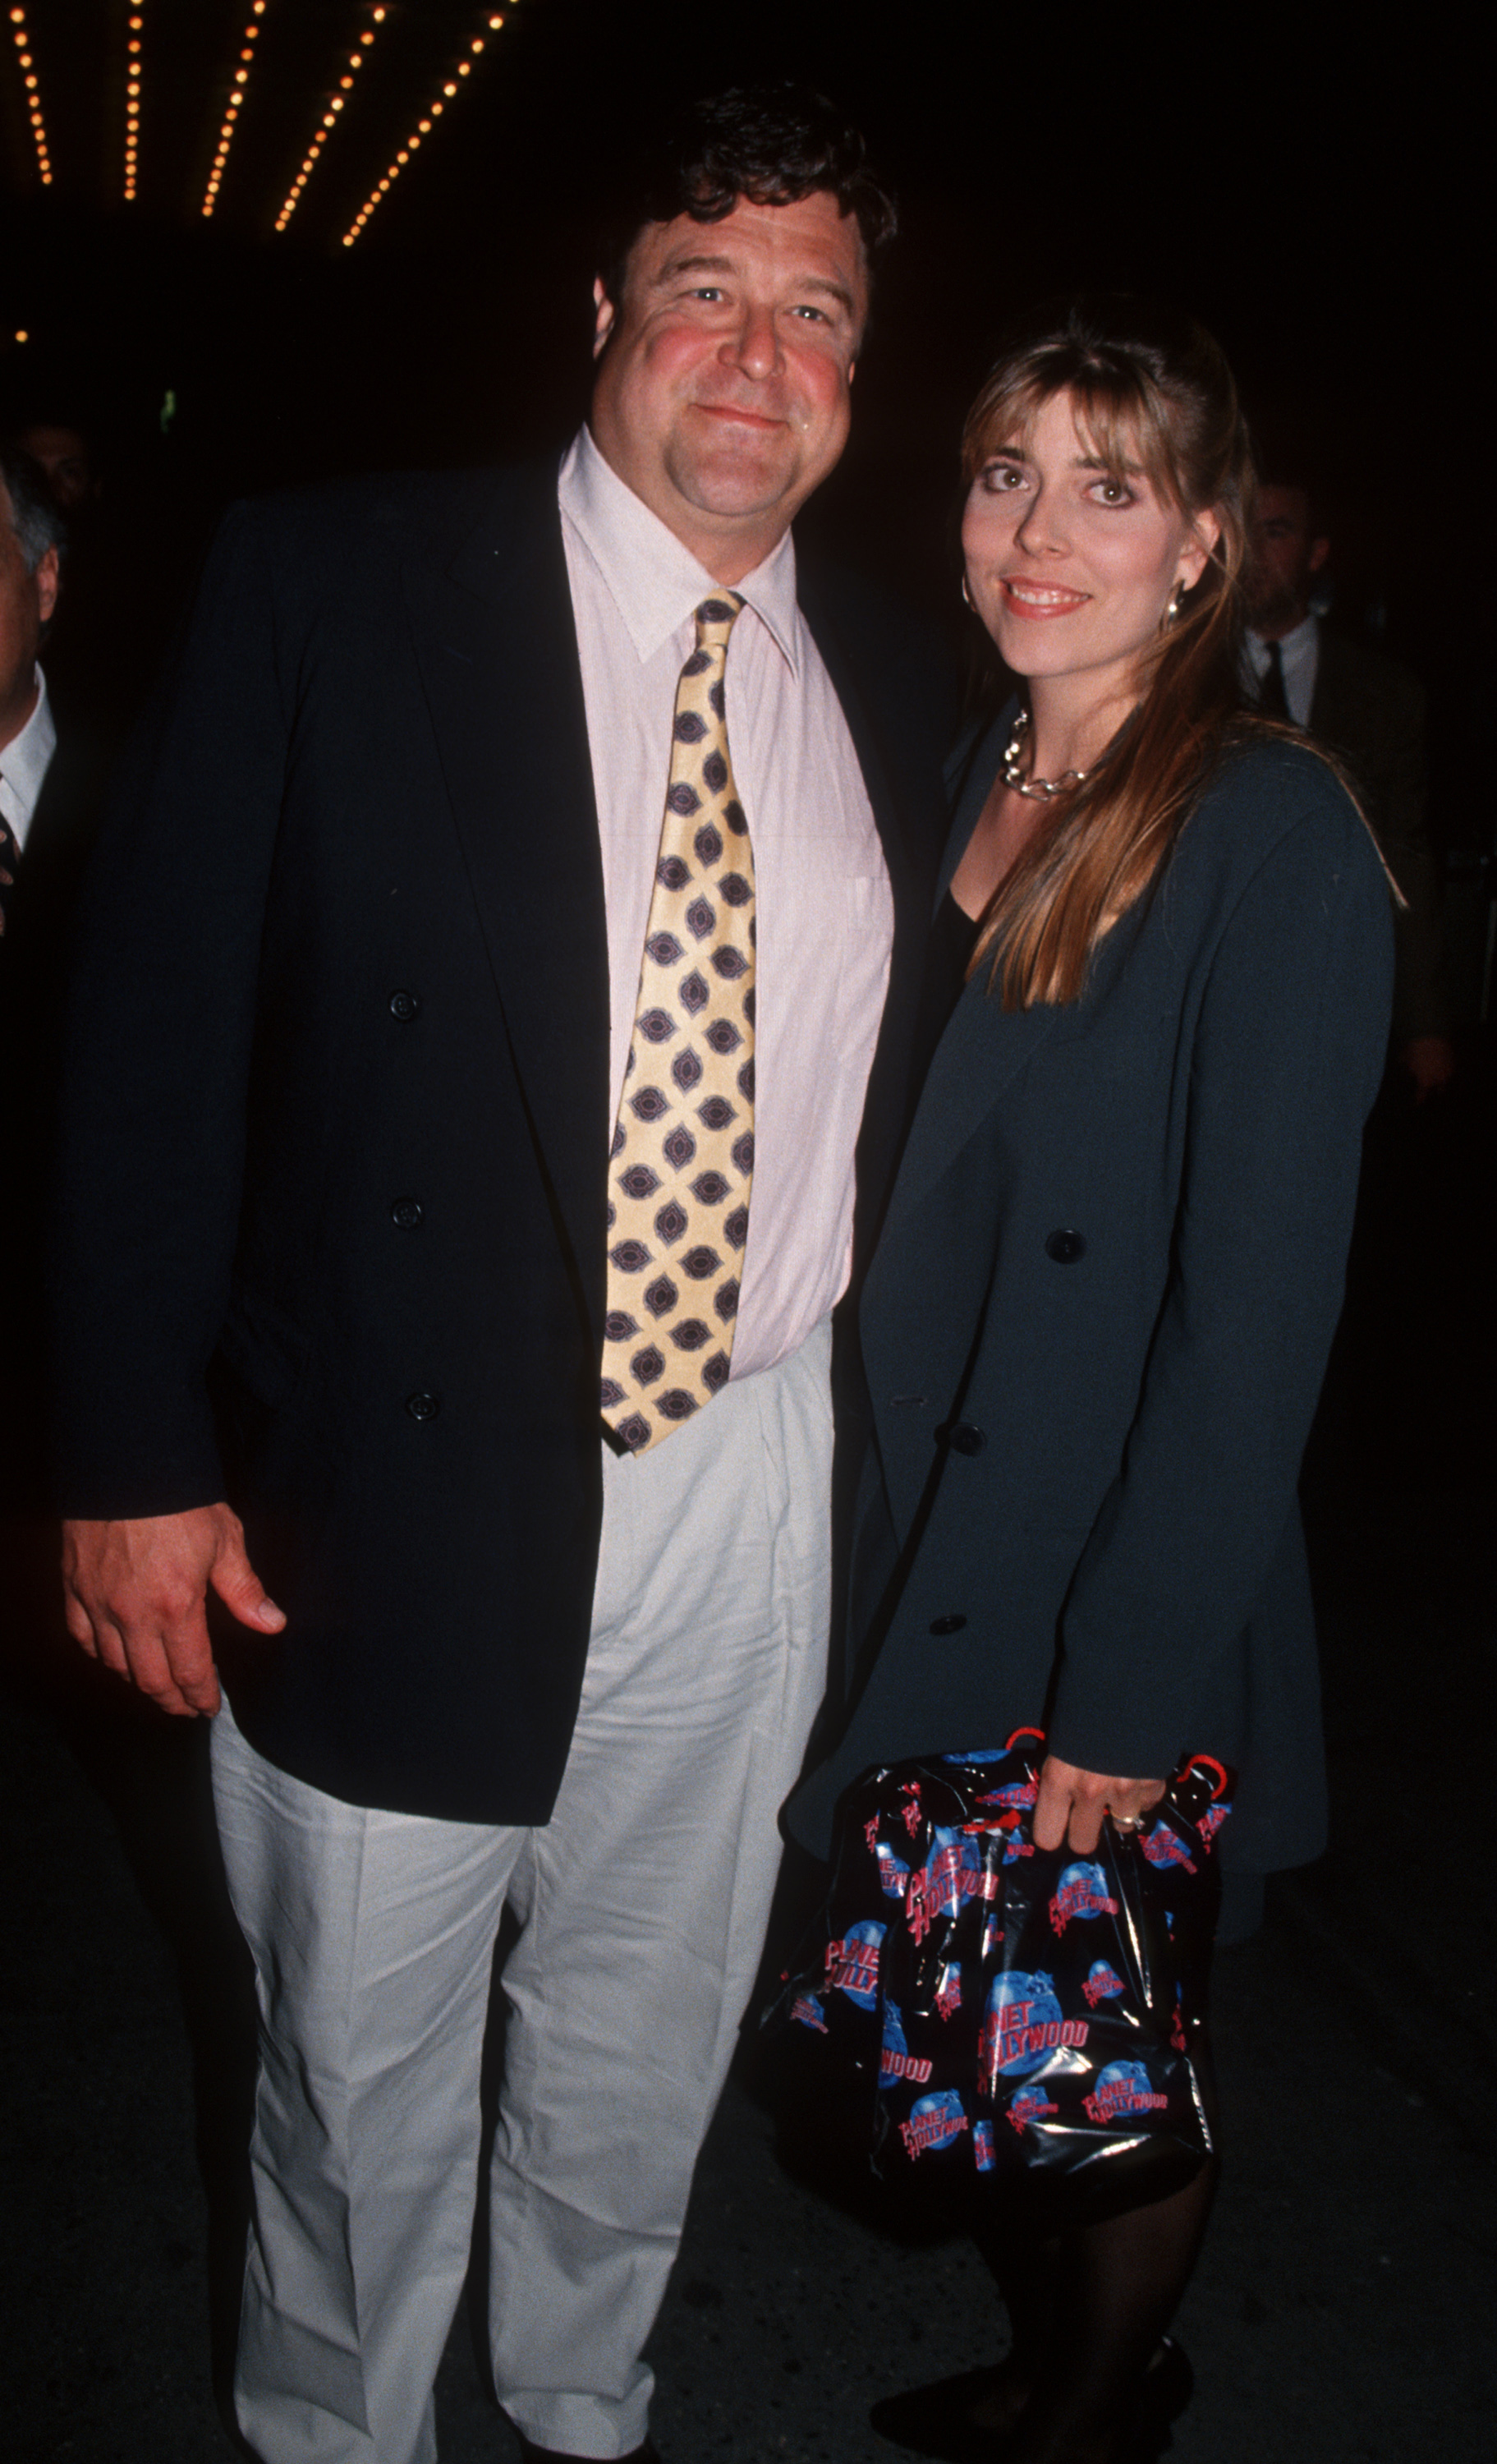 John Goodman and his wife Anna Beth Hartzog attend the premiere of "The Flintstones" on May 23, 1994, at the Ziegfeld Theater in New York City, New York. | Source: Getty Images